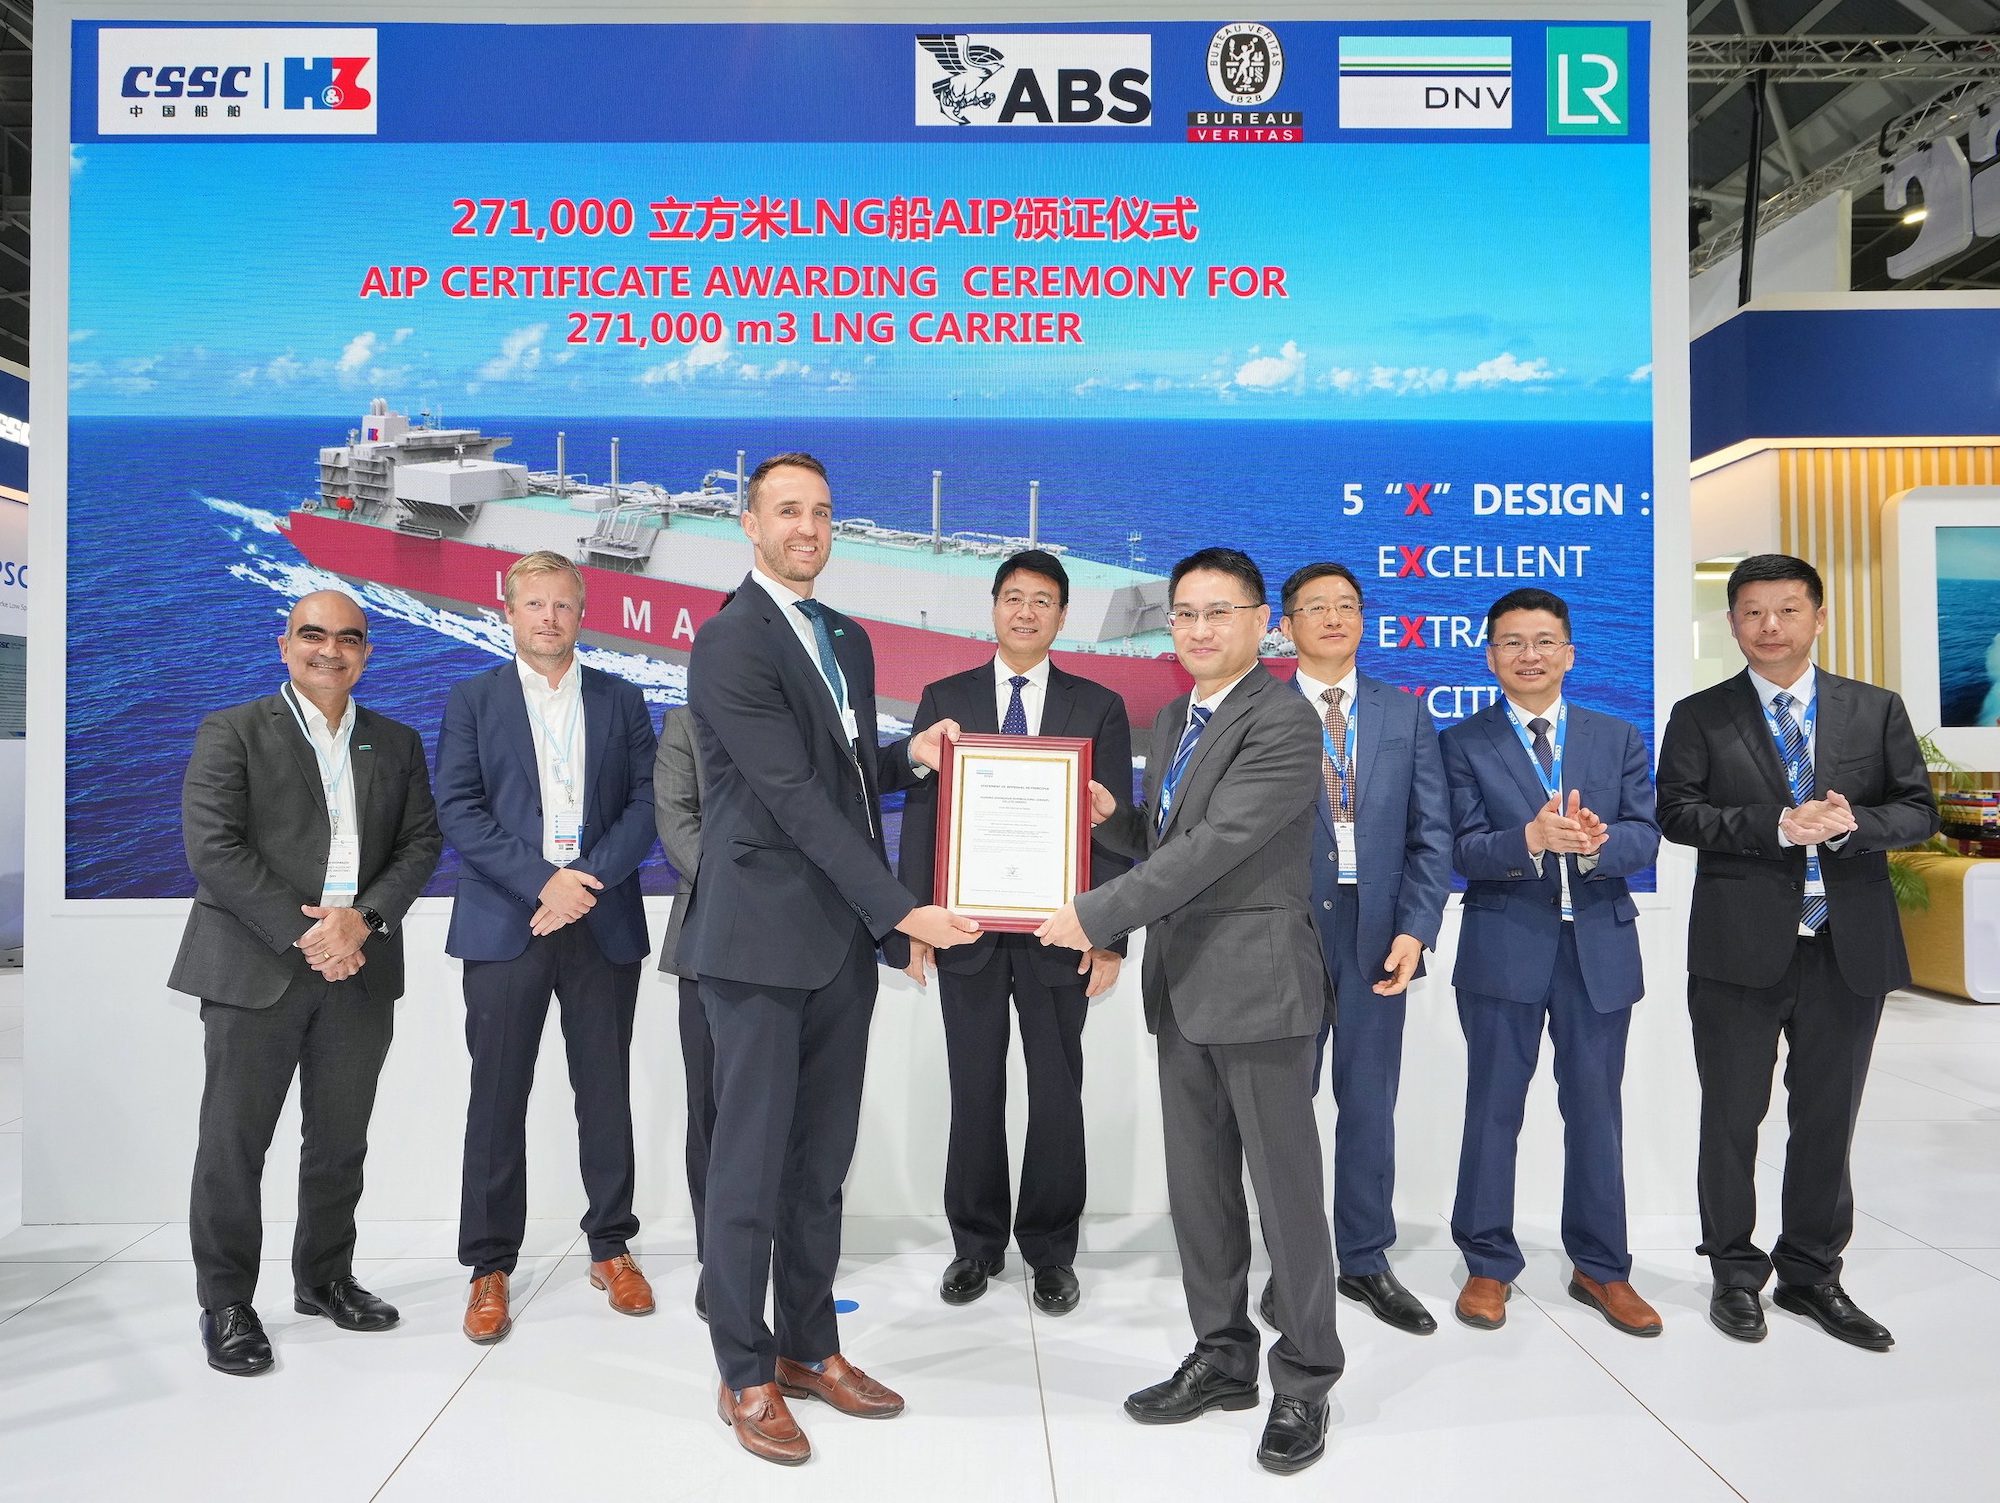 DNV presents AiP to Hudong-Zhonghua for world's largest LNG carrier design